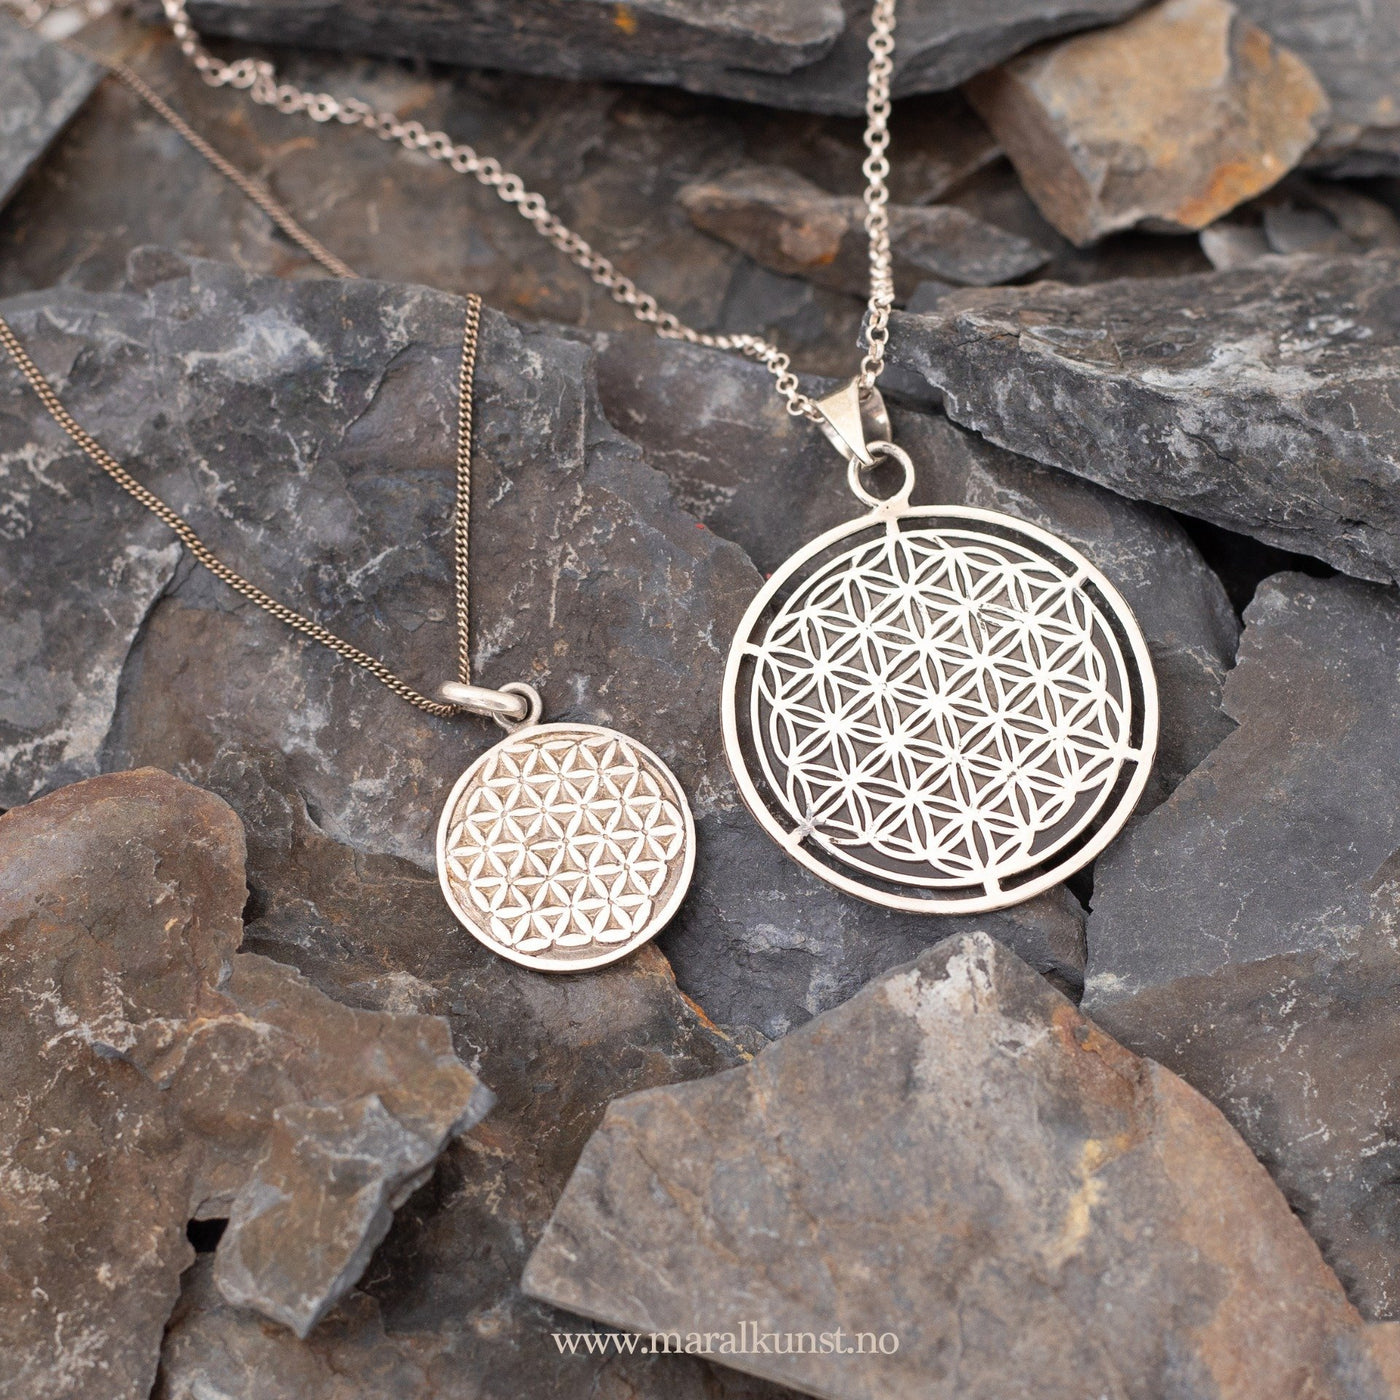 Mexican Flower Of Life Necklace - Maral Kunst Jewelry